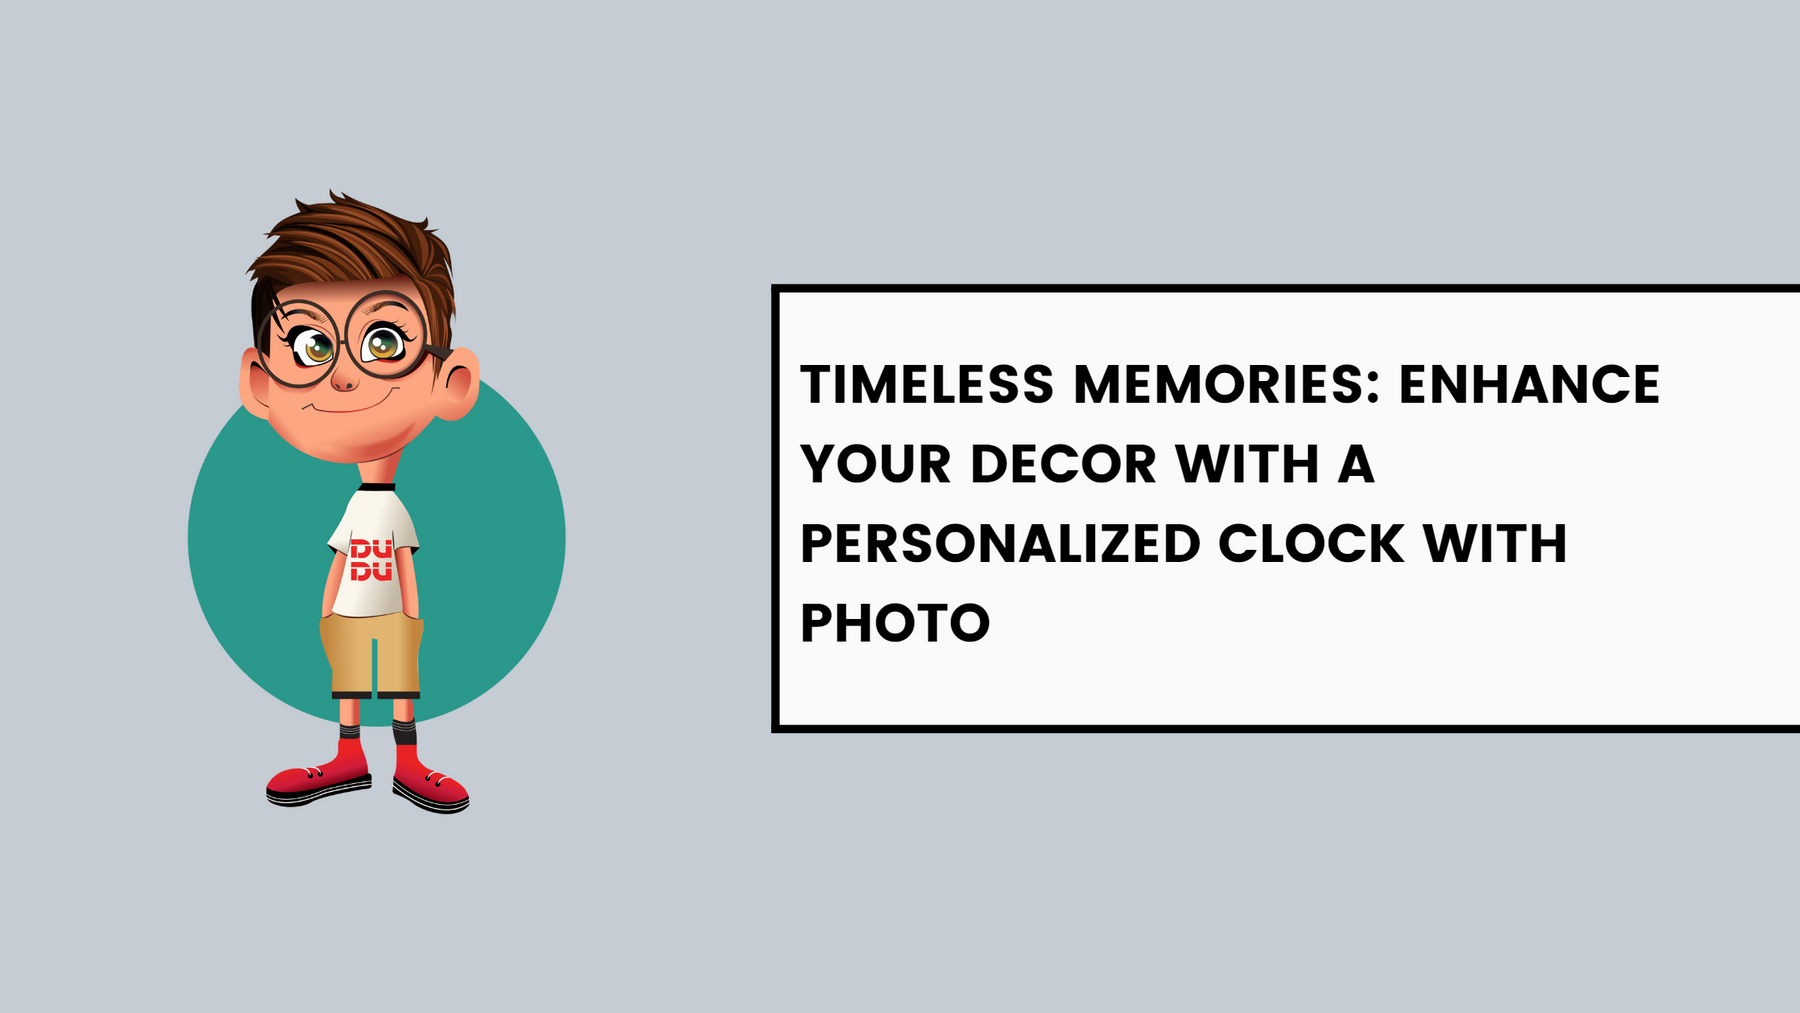 Timeless Memories: Enhance Your Decor with a Personalized Clock with Photo